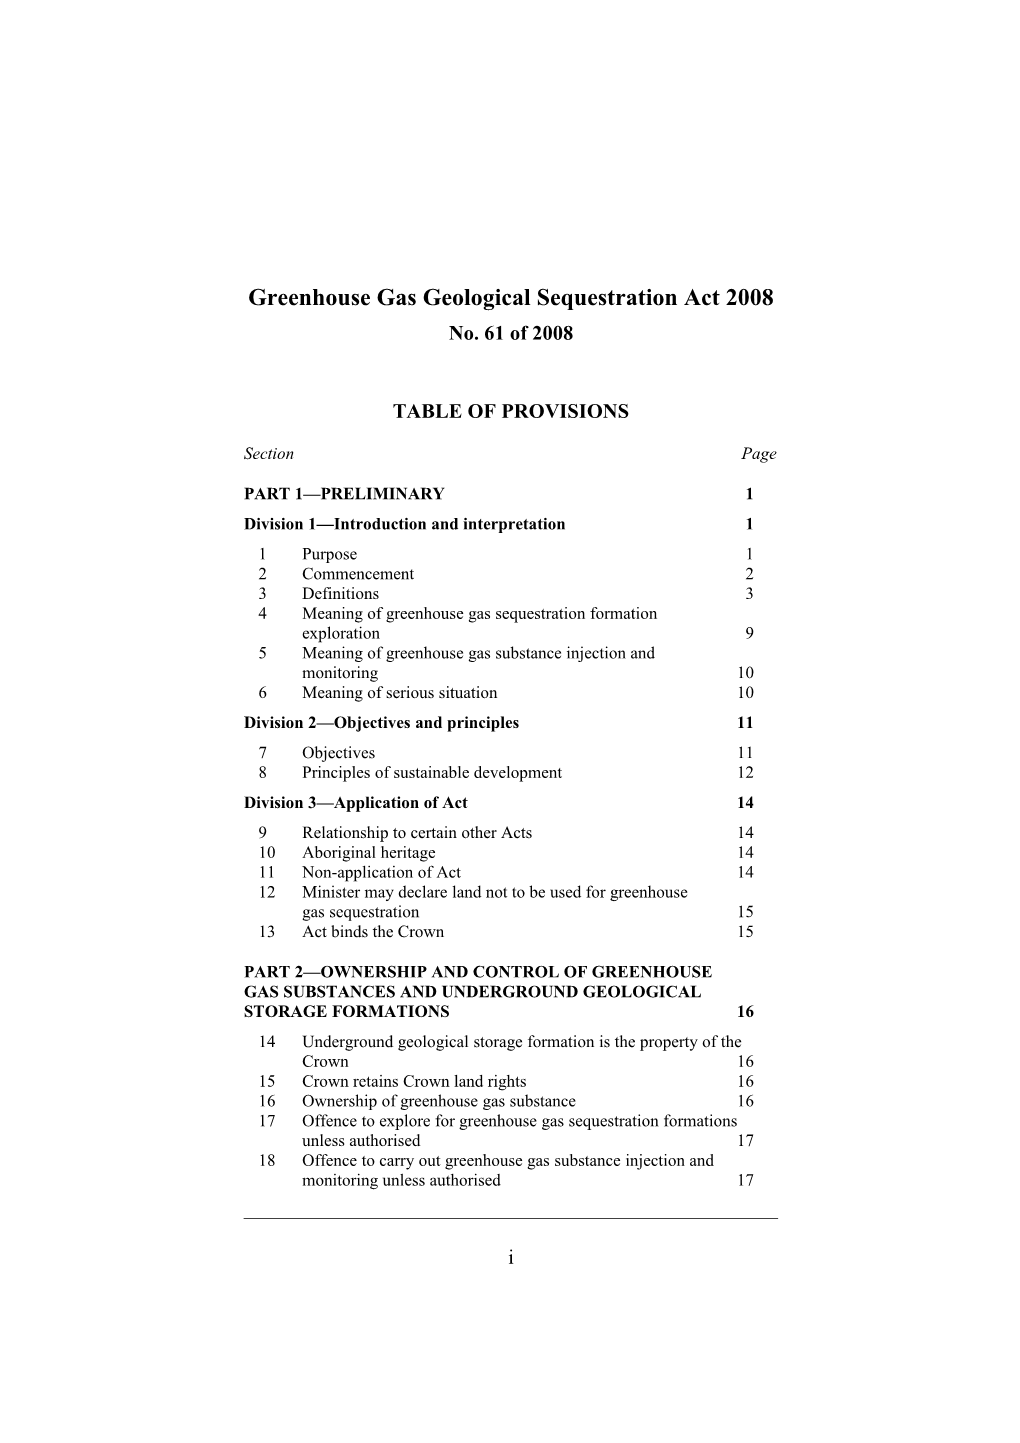 Greenhouse Gas Geological Sequestration Act 2008